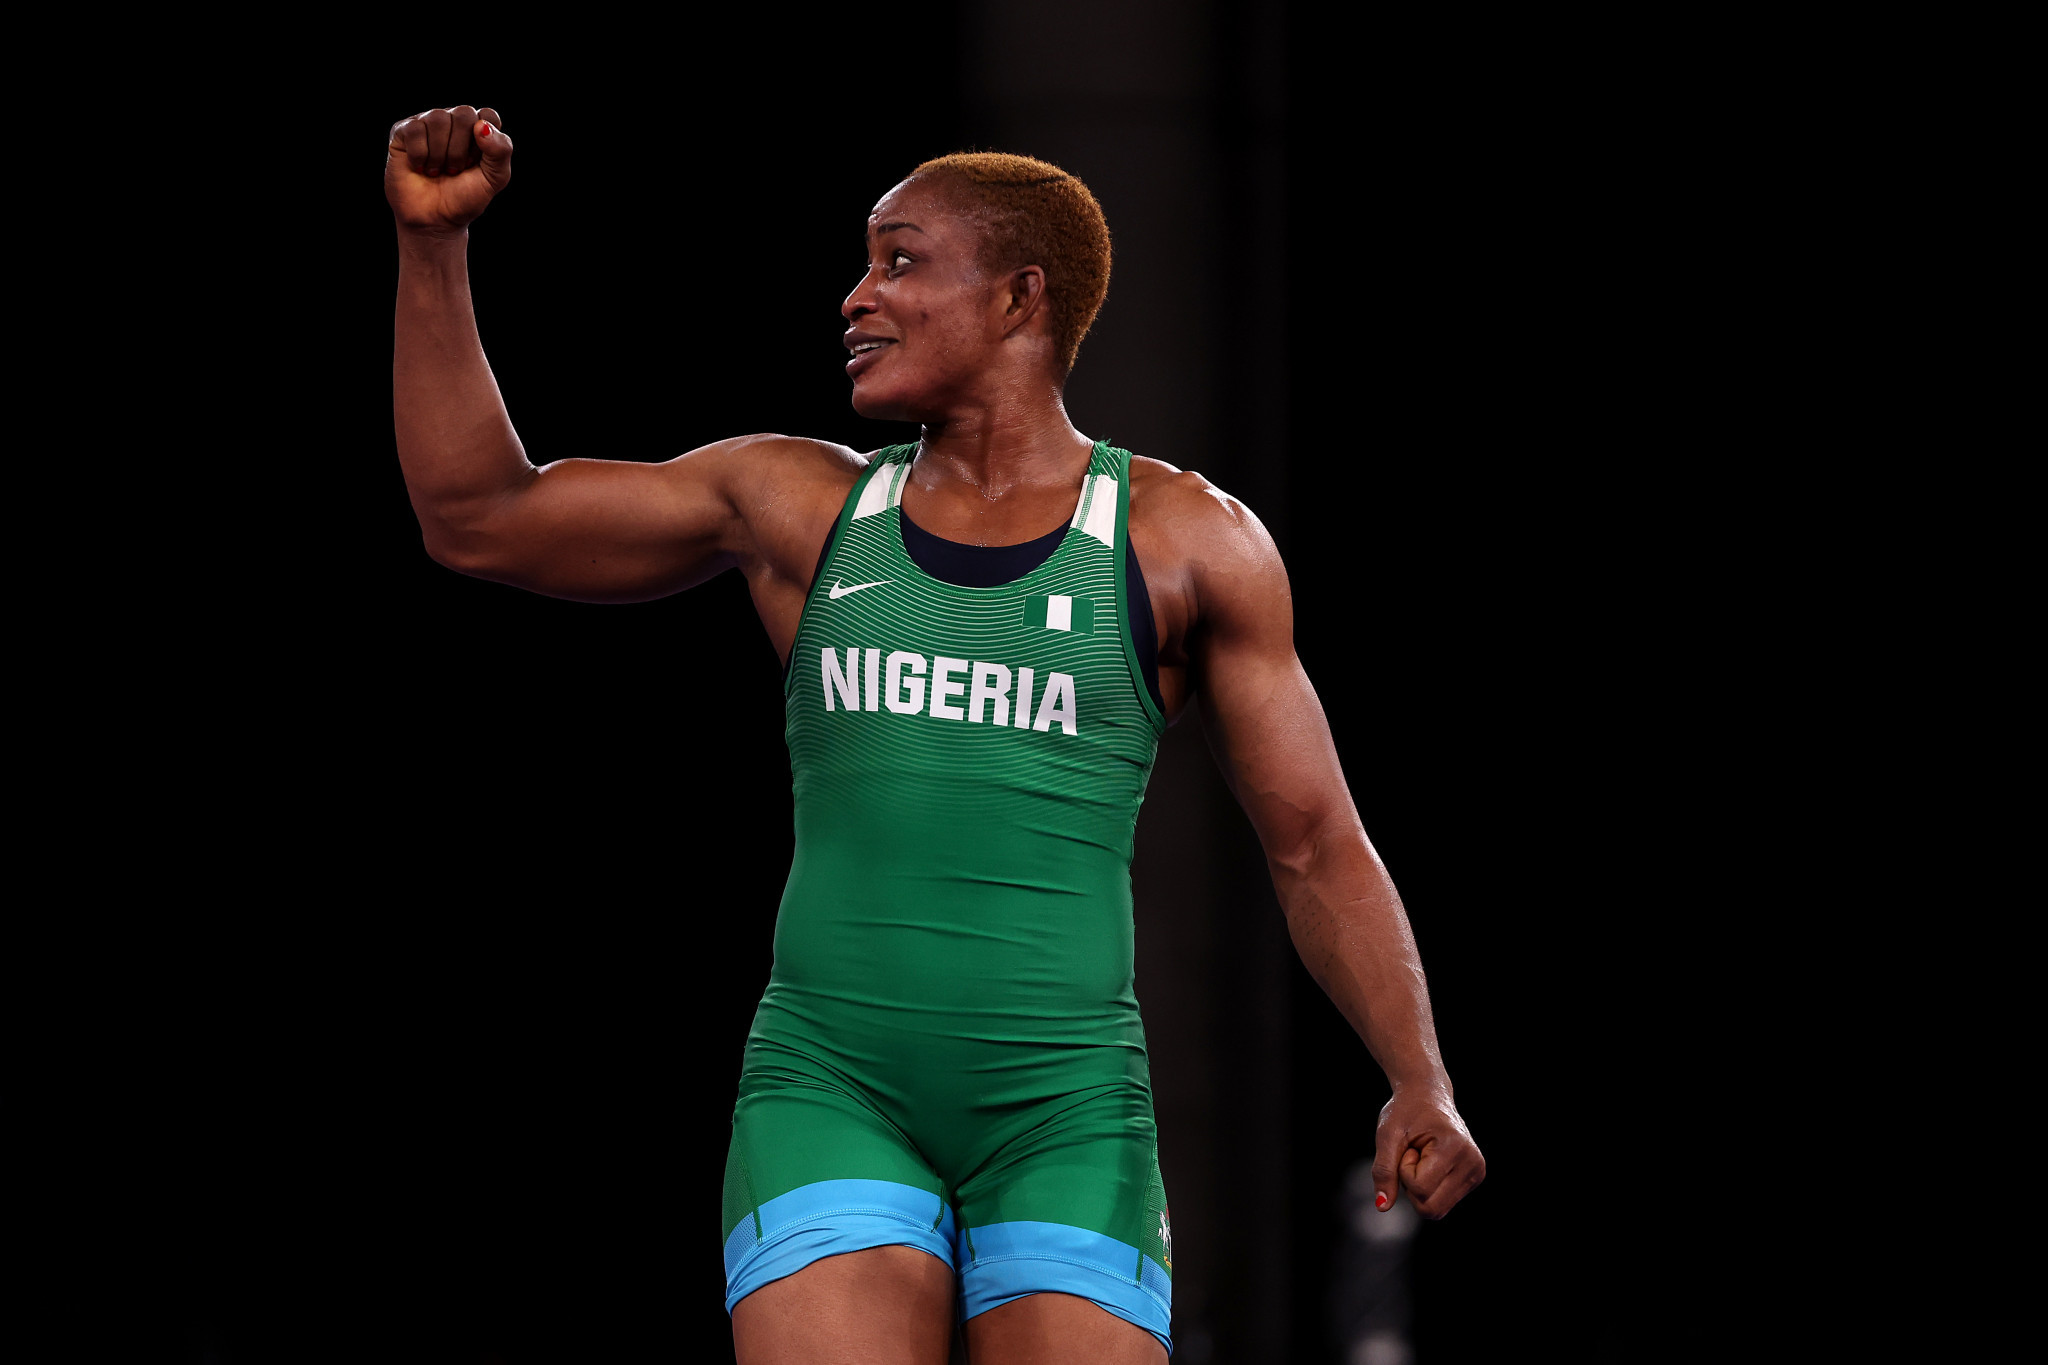 Blessing Oborududu has won 11 straight titles at the African Wrestling Championships ©Getty Images